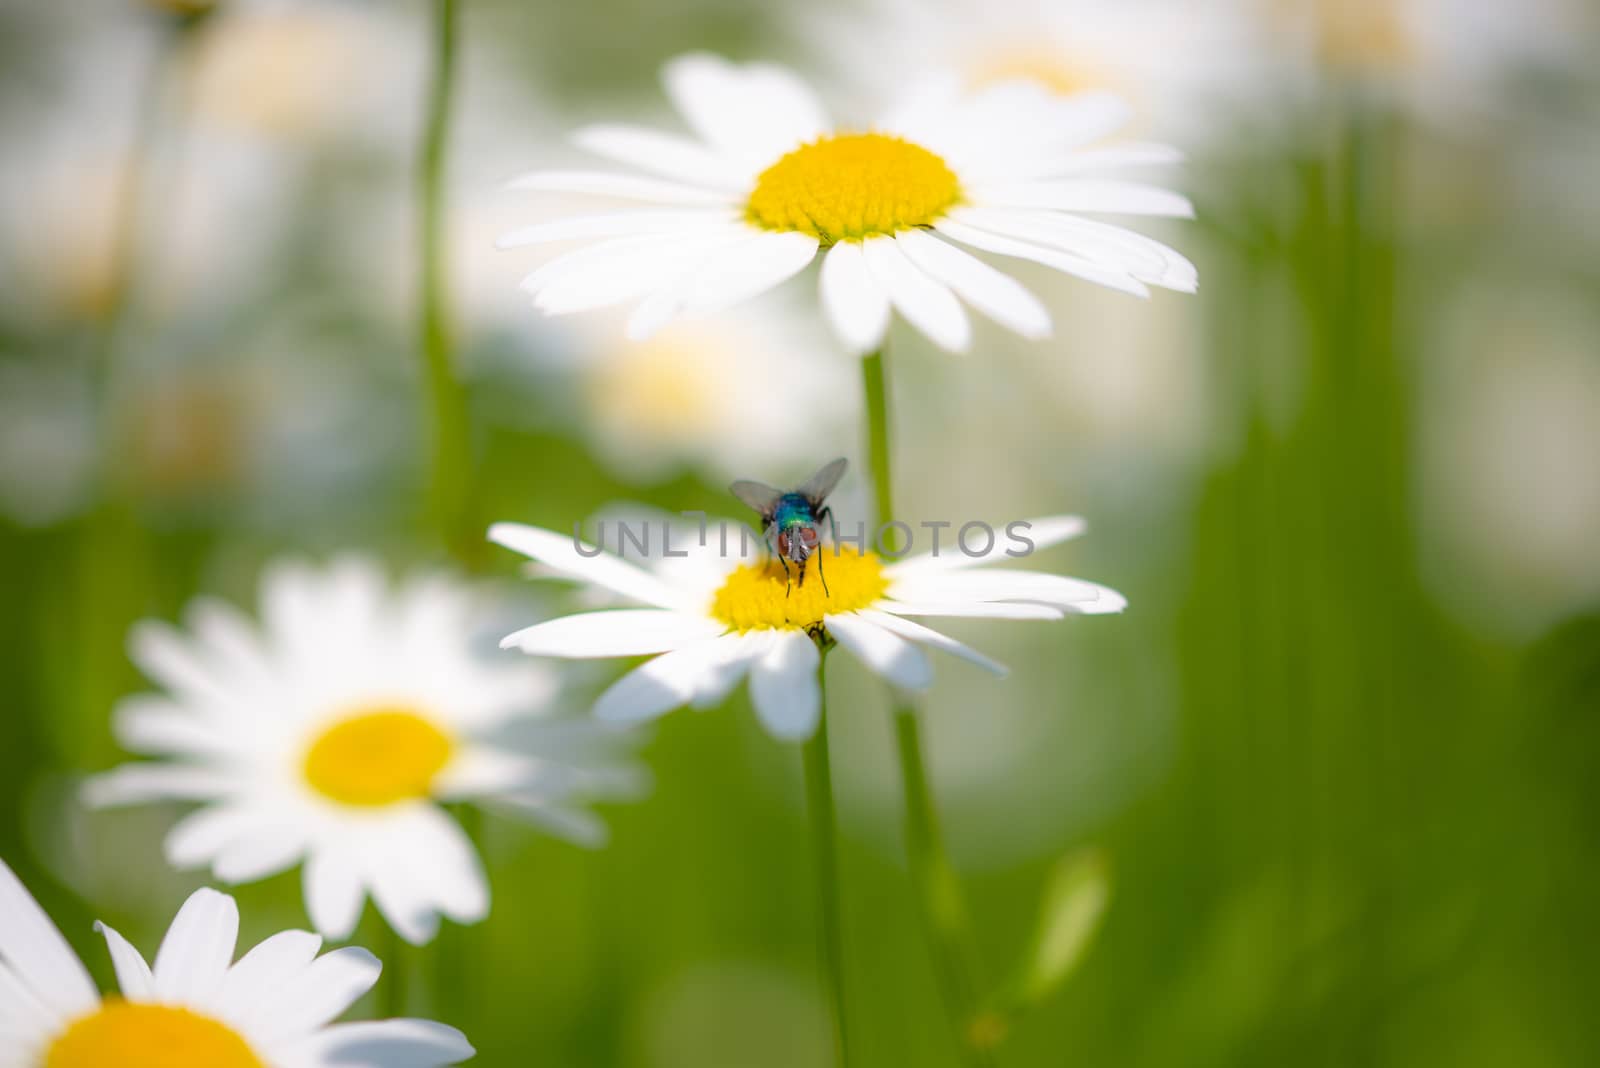 Bottle fly on daisy, macro, pollinating insects